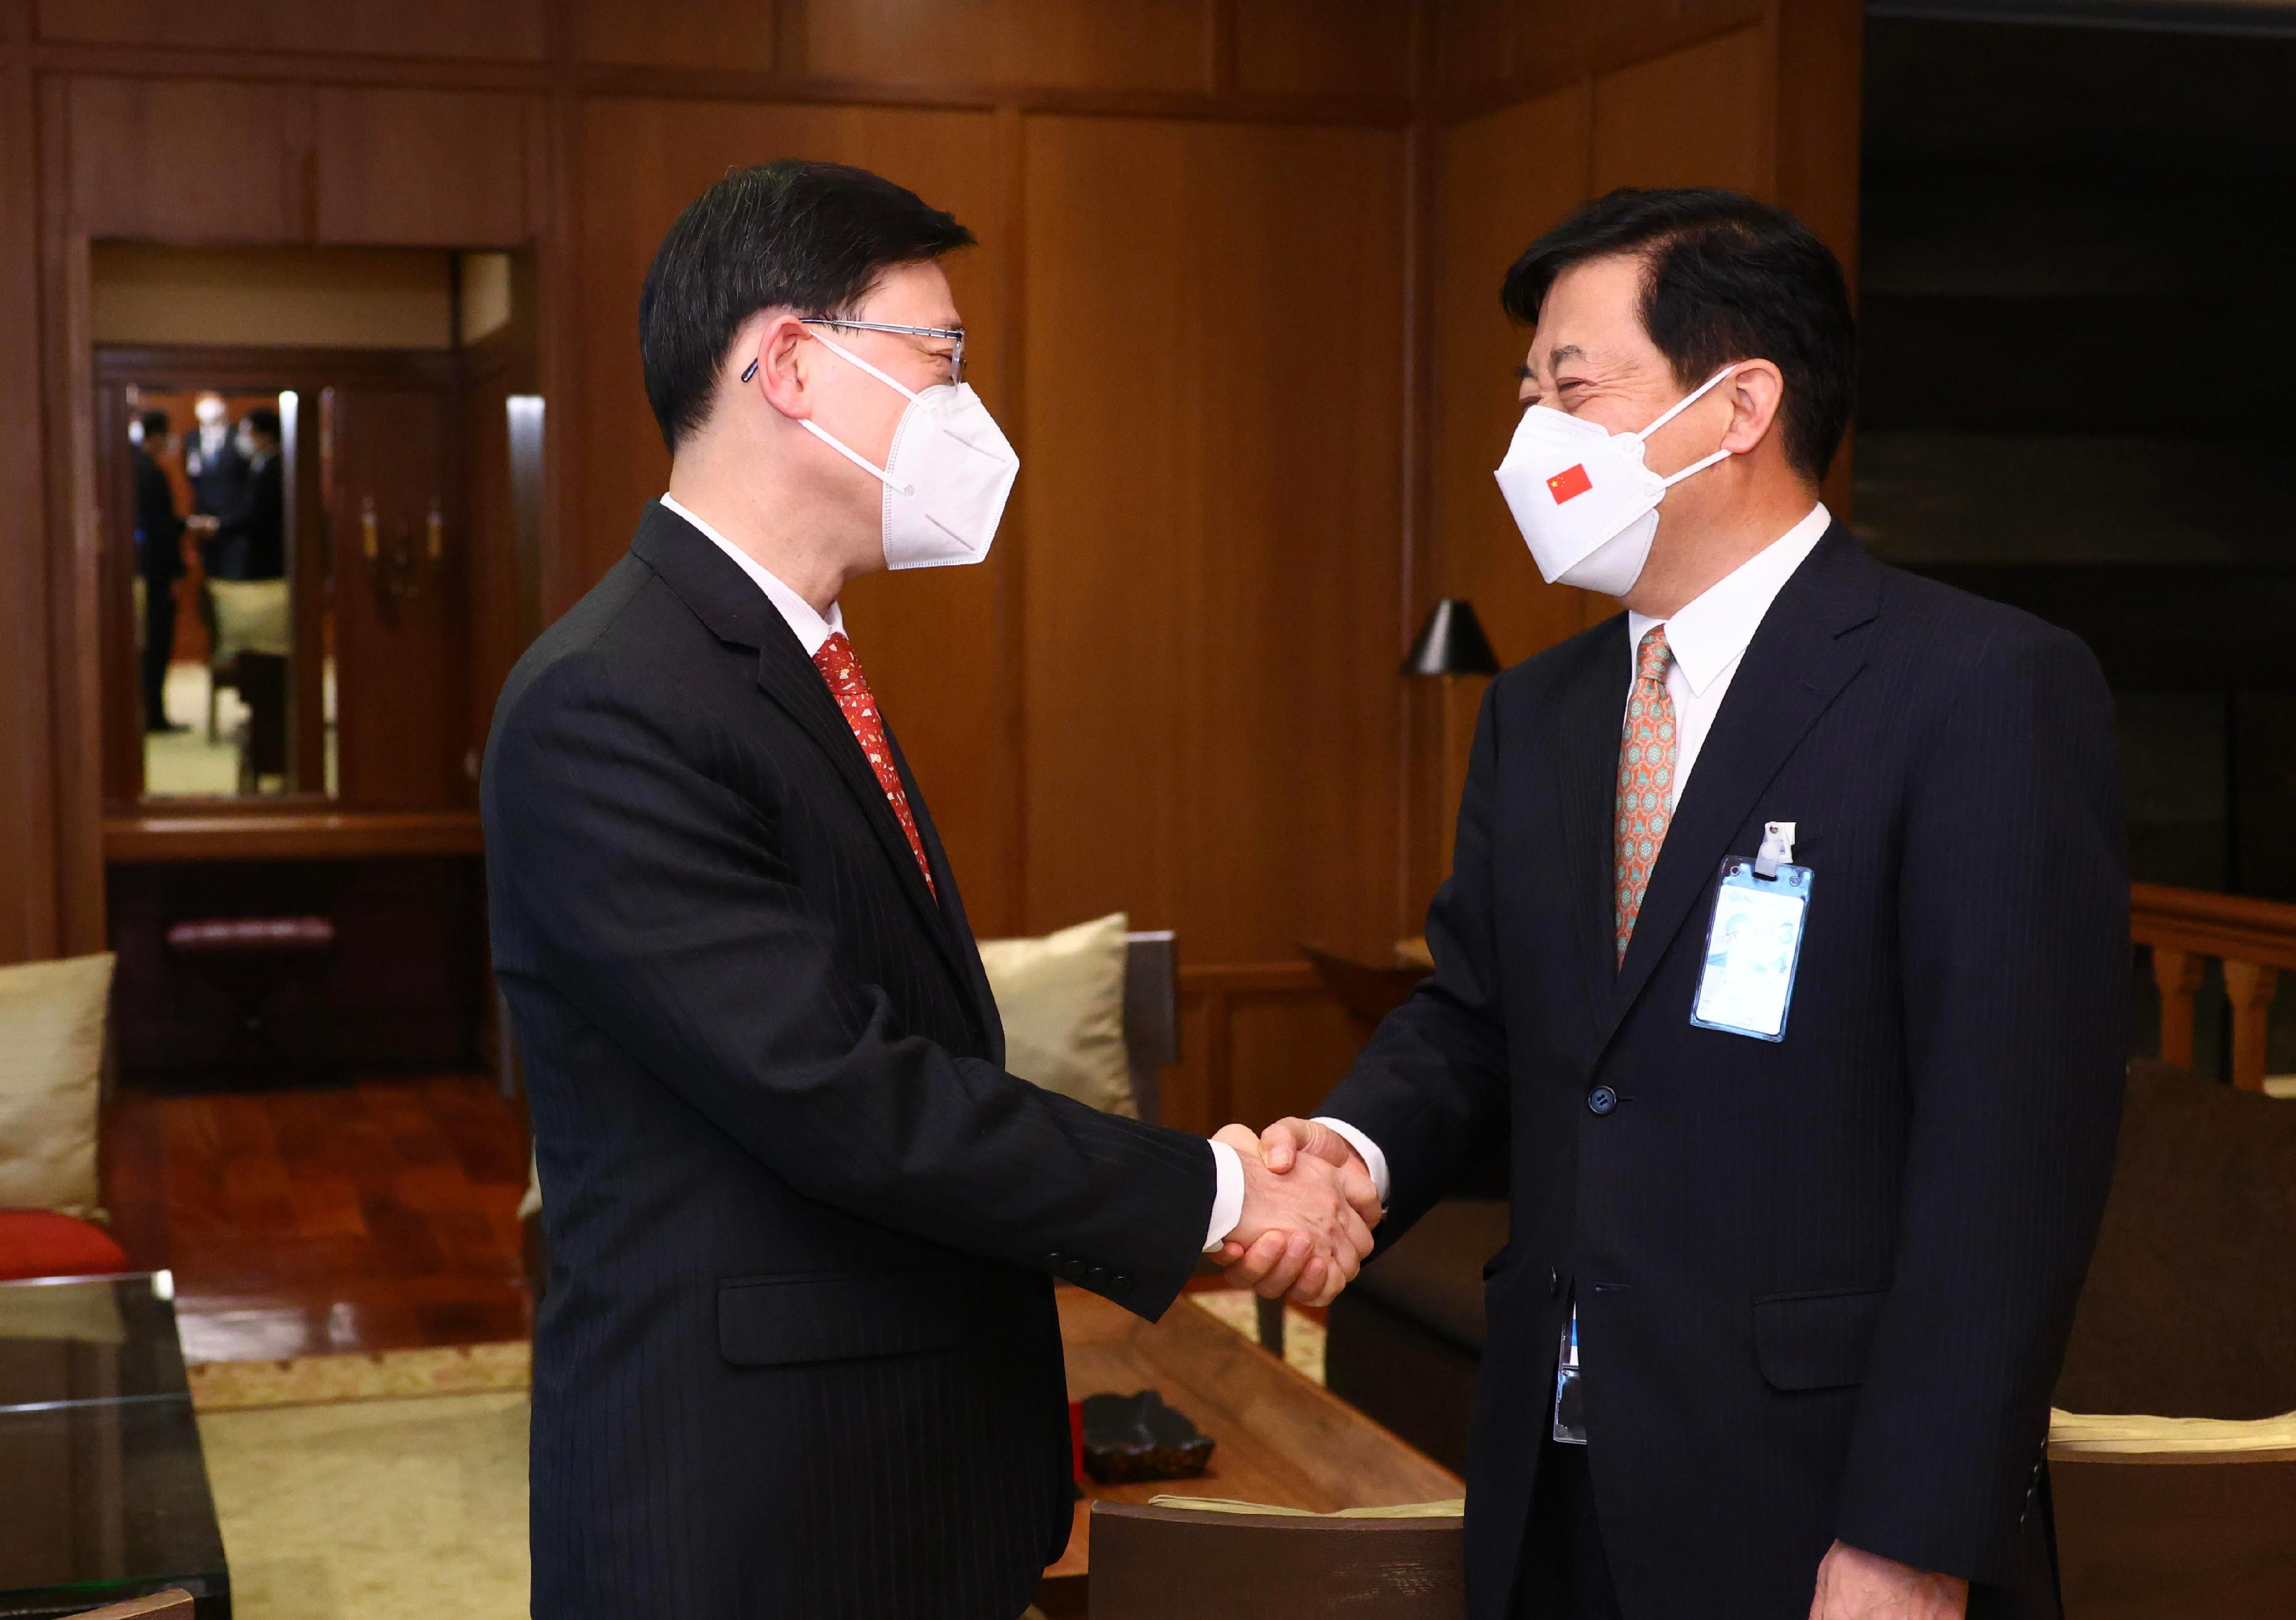 The Chief Executive, Mr John Lee (left), meets with the Ambassador Extraordinary and Plenipotentiary of the People's Republic of China to the Kingdom of Thailand, Mr Han Zhiqiang (right), in Bangkok, Thailand, today (November 17).